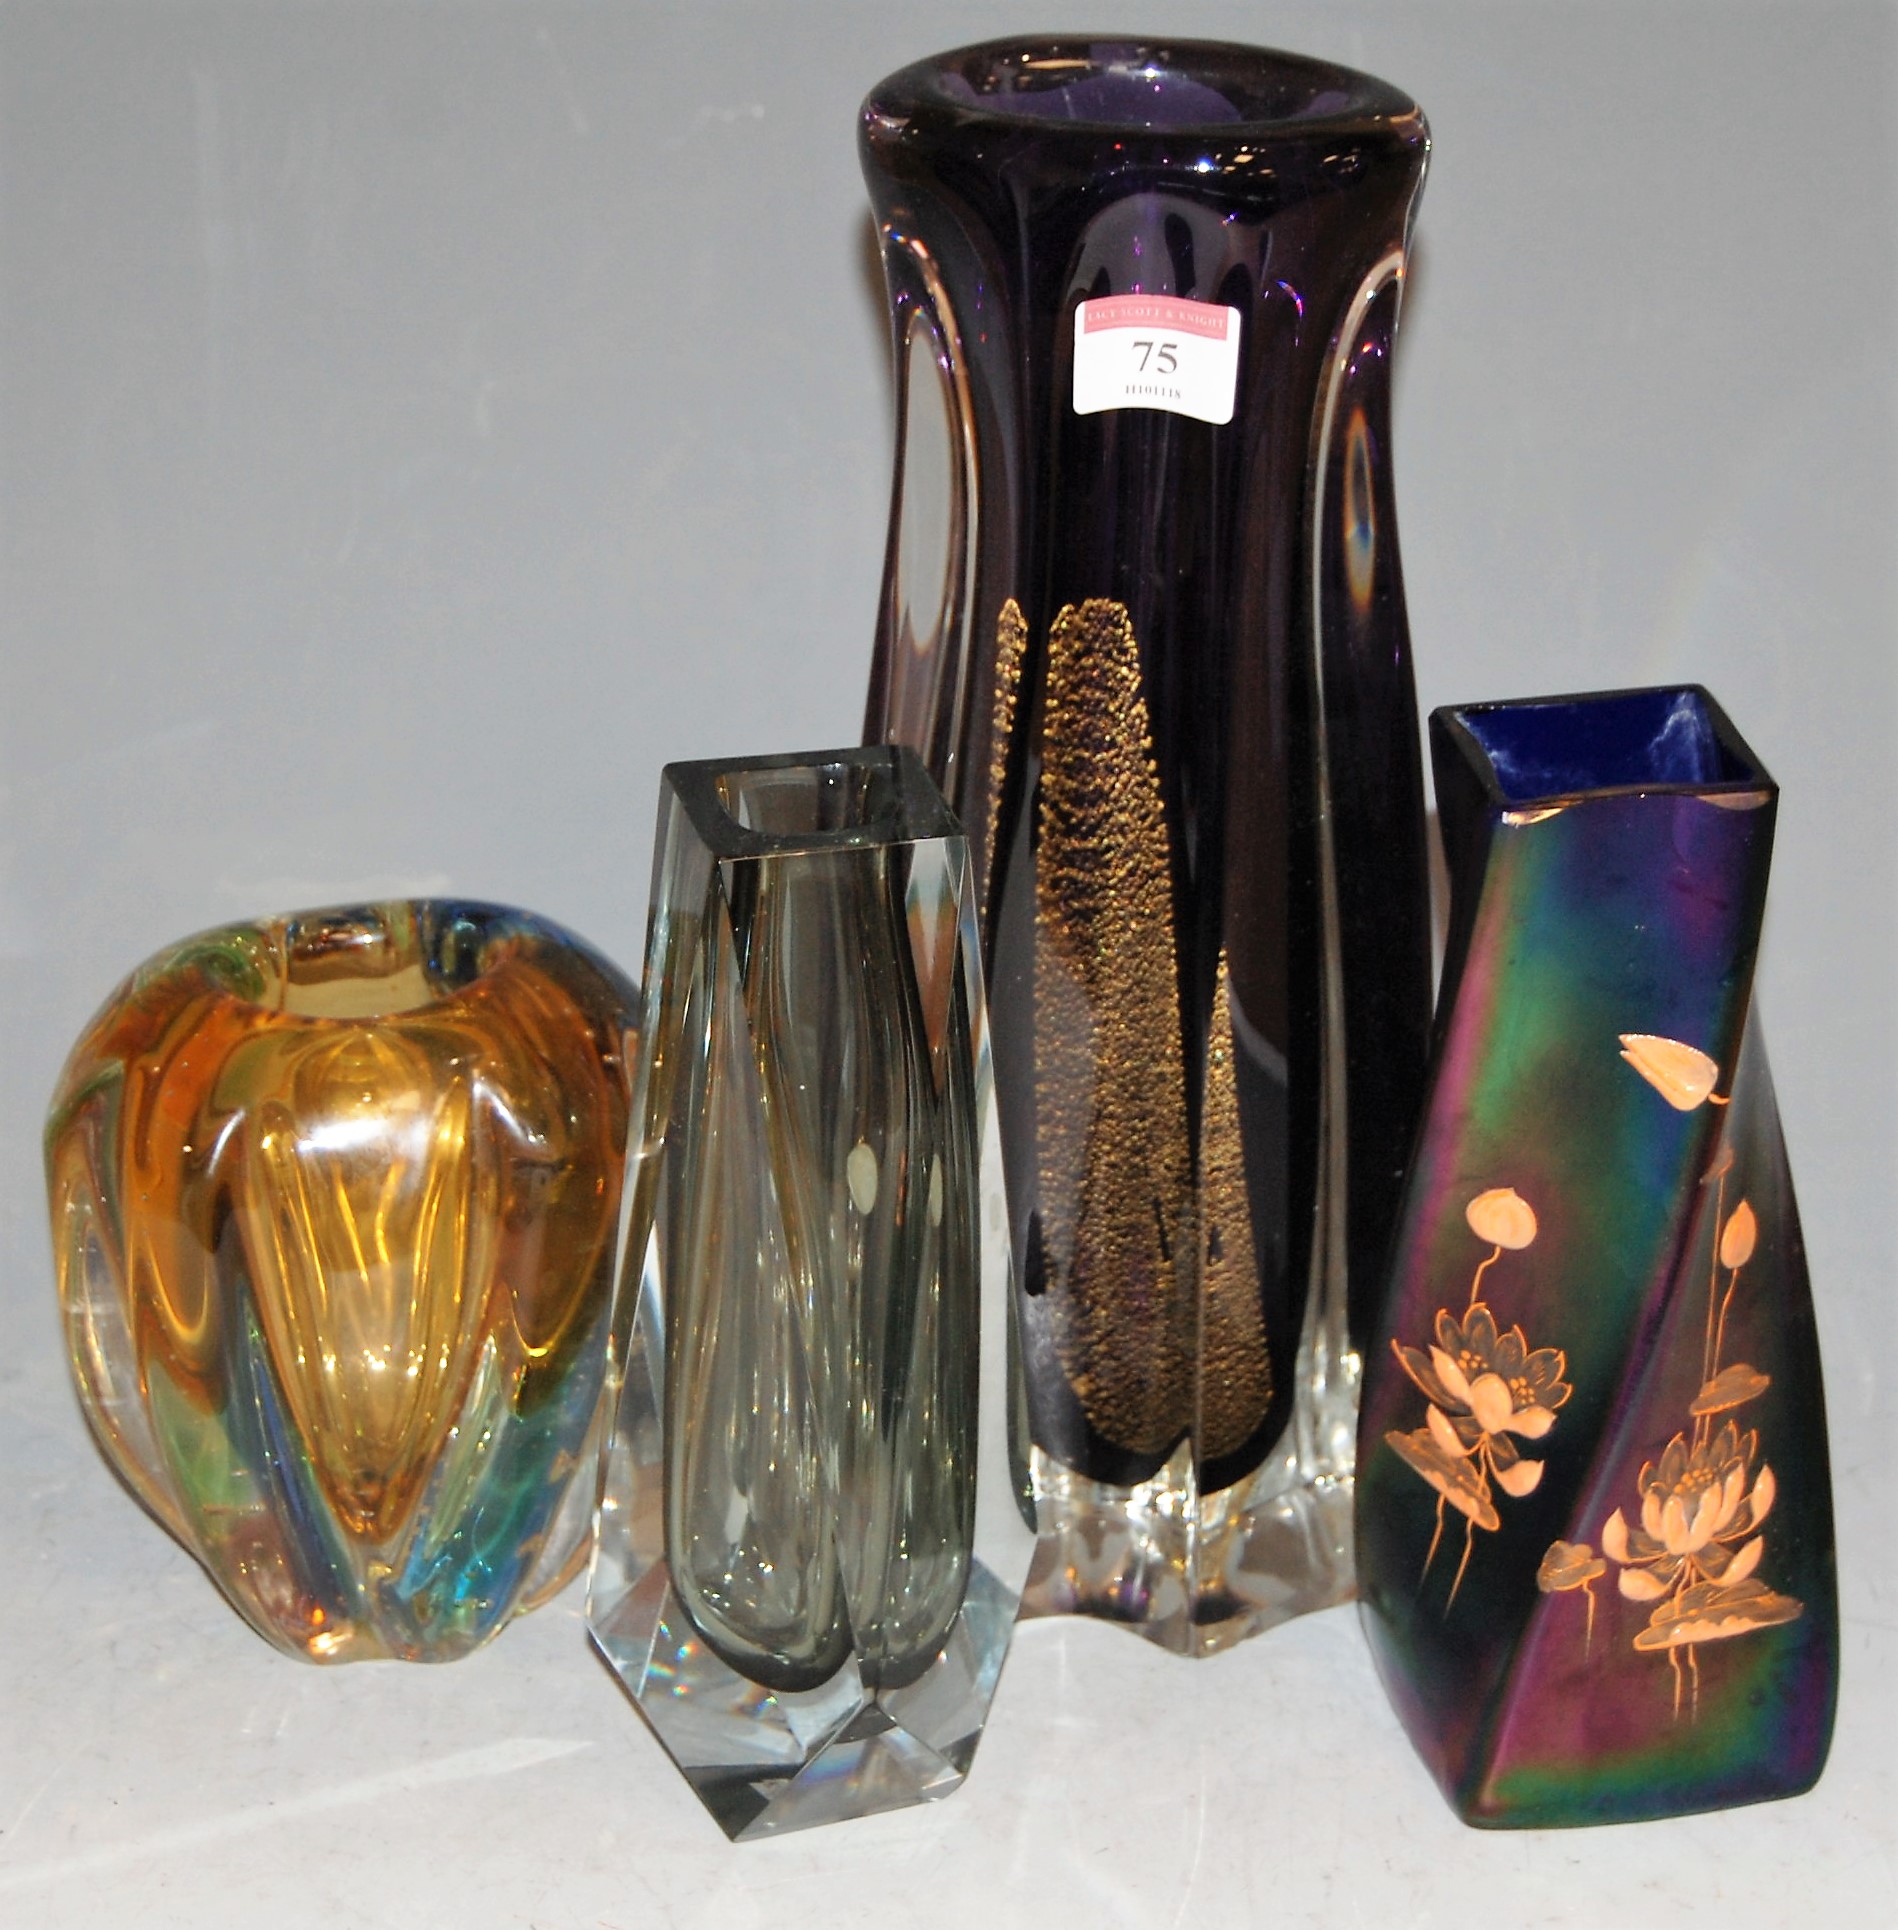 A mid 20th century iridescent glass vase of square twisted form having applied lilypad decoration,